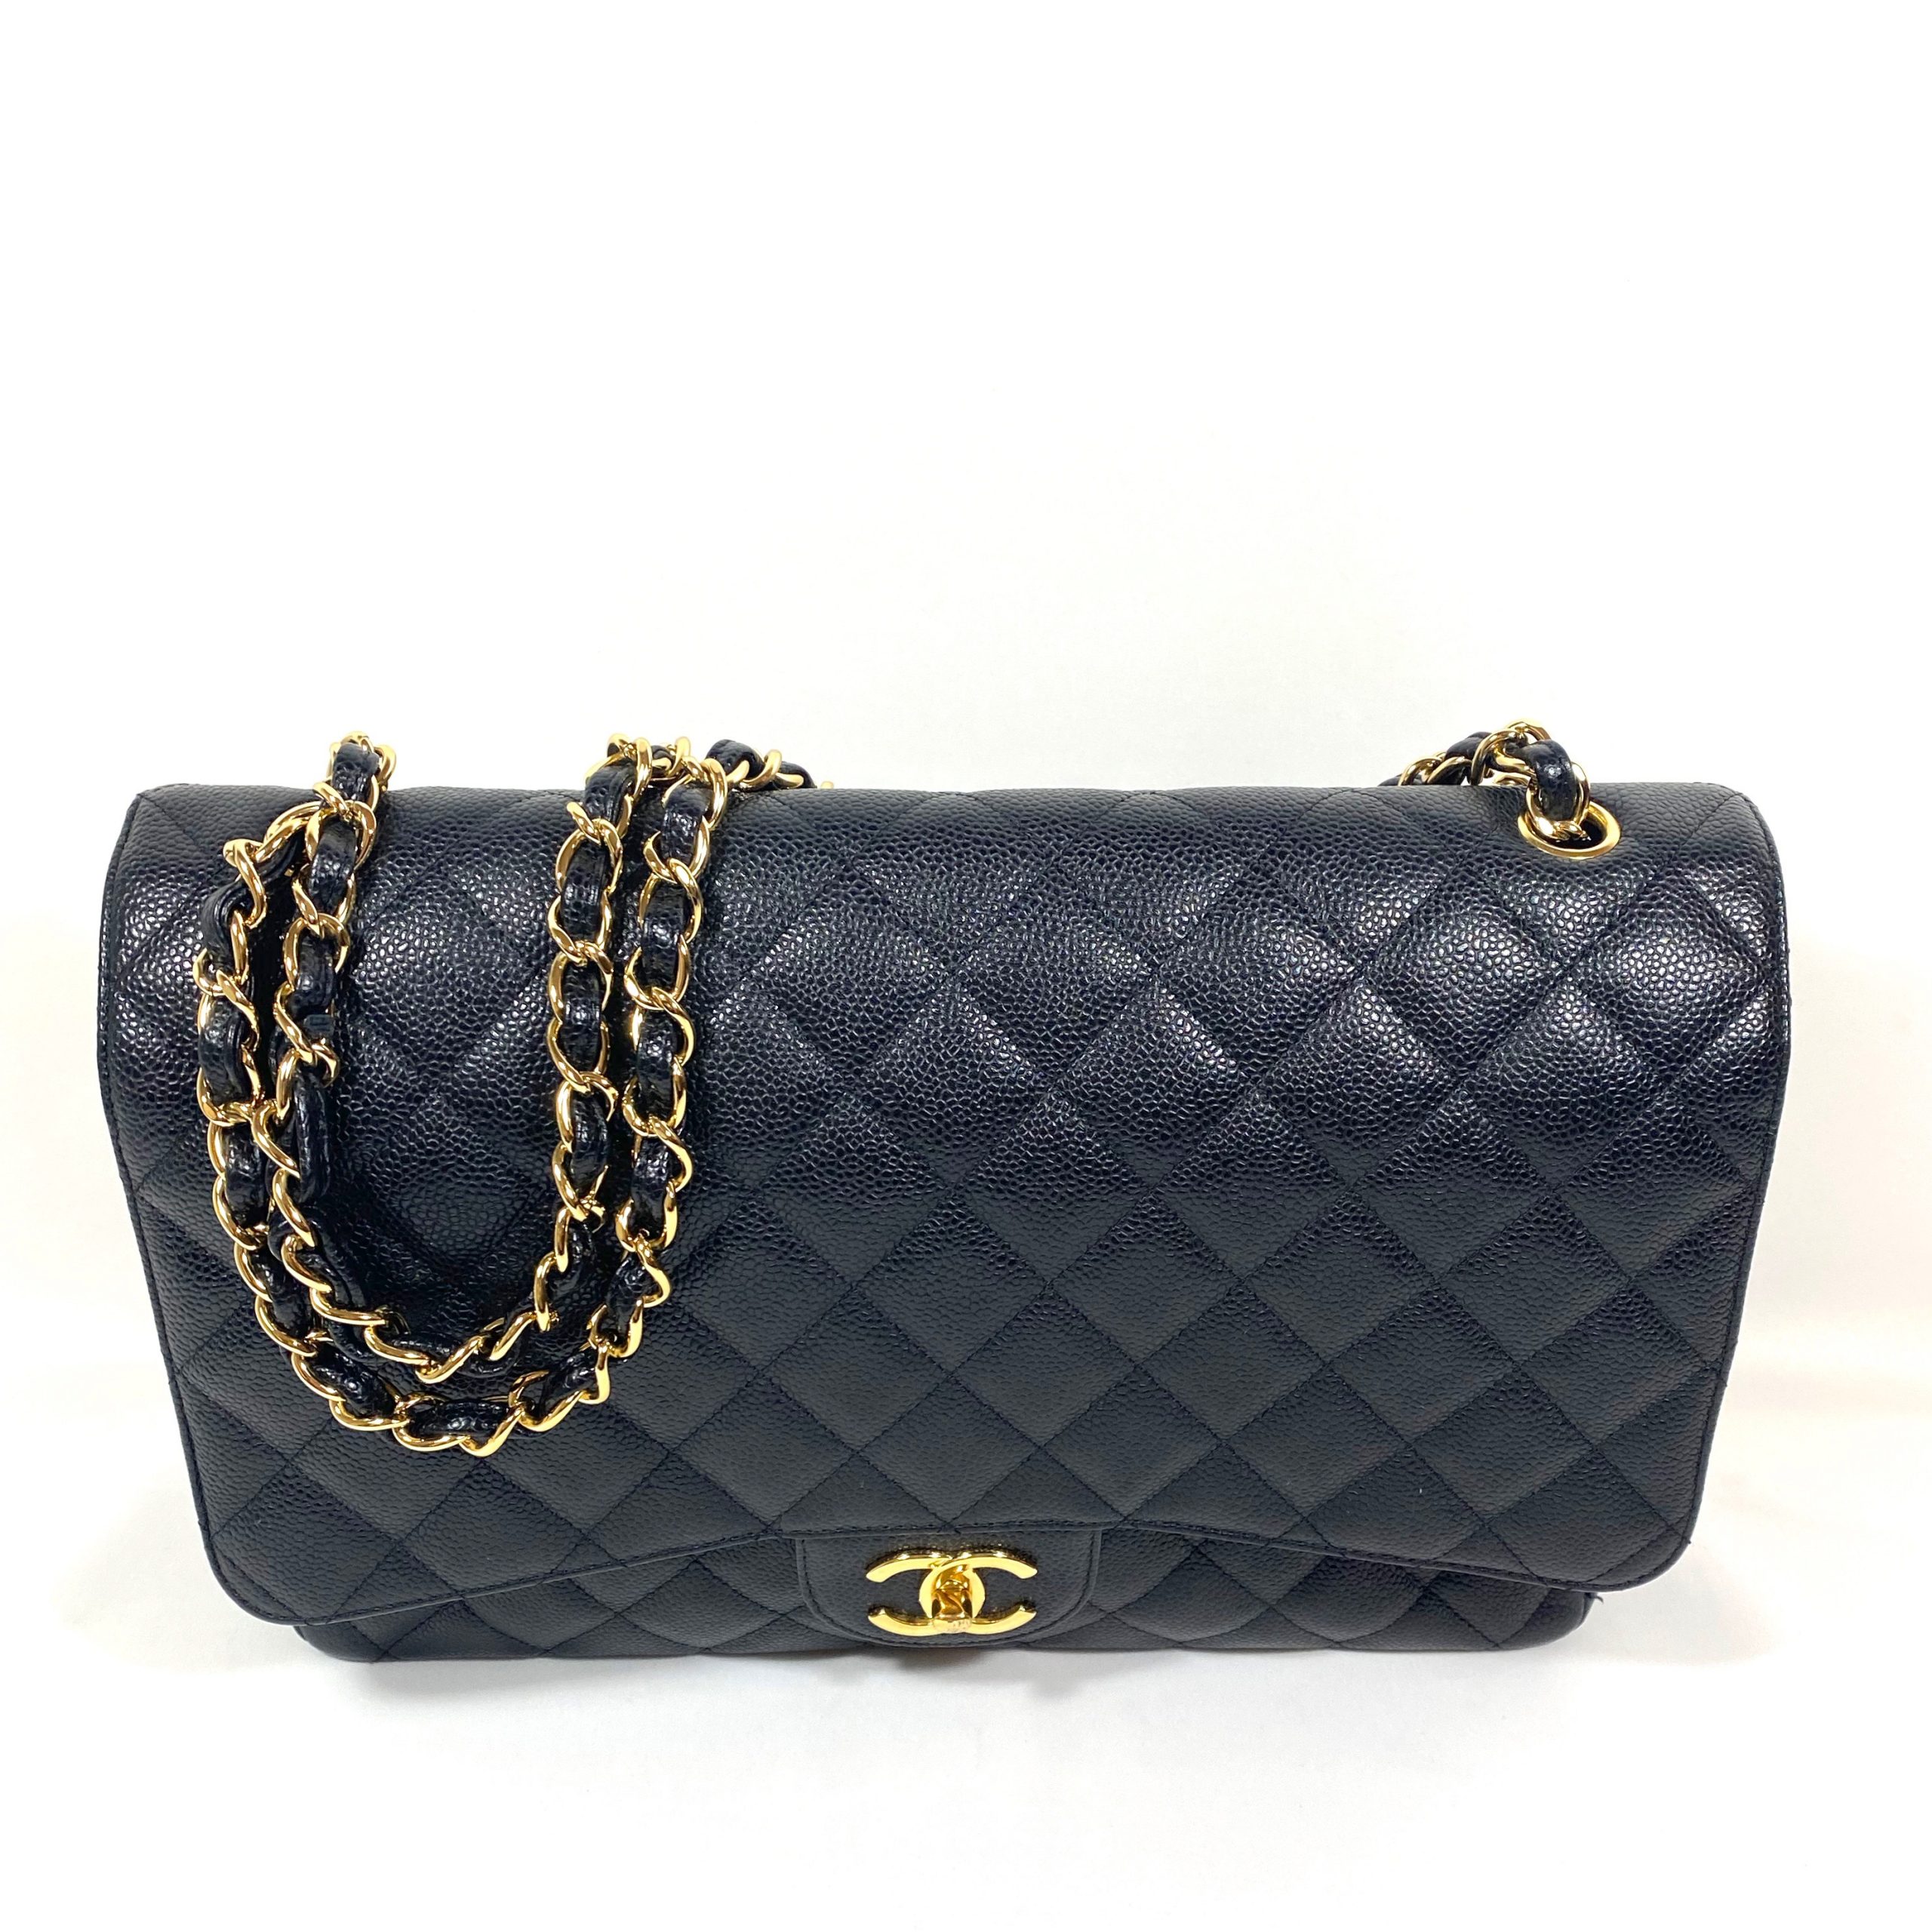 CHANEL MAXI QUILTED DOUBLE FLAP BLACK CAVIAR LEATHER SHOULDER BAG - Still  in fashion